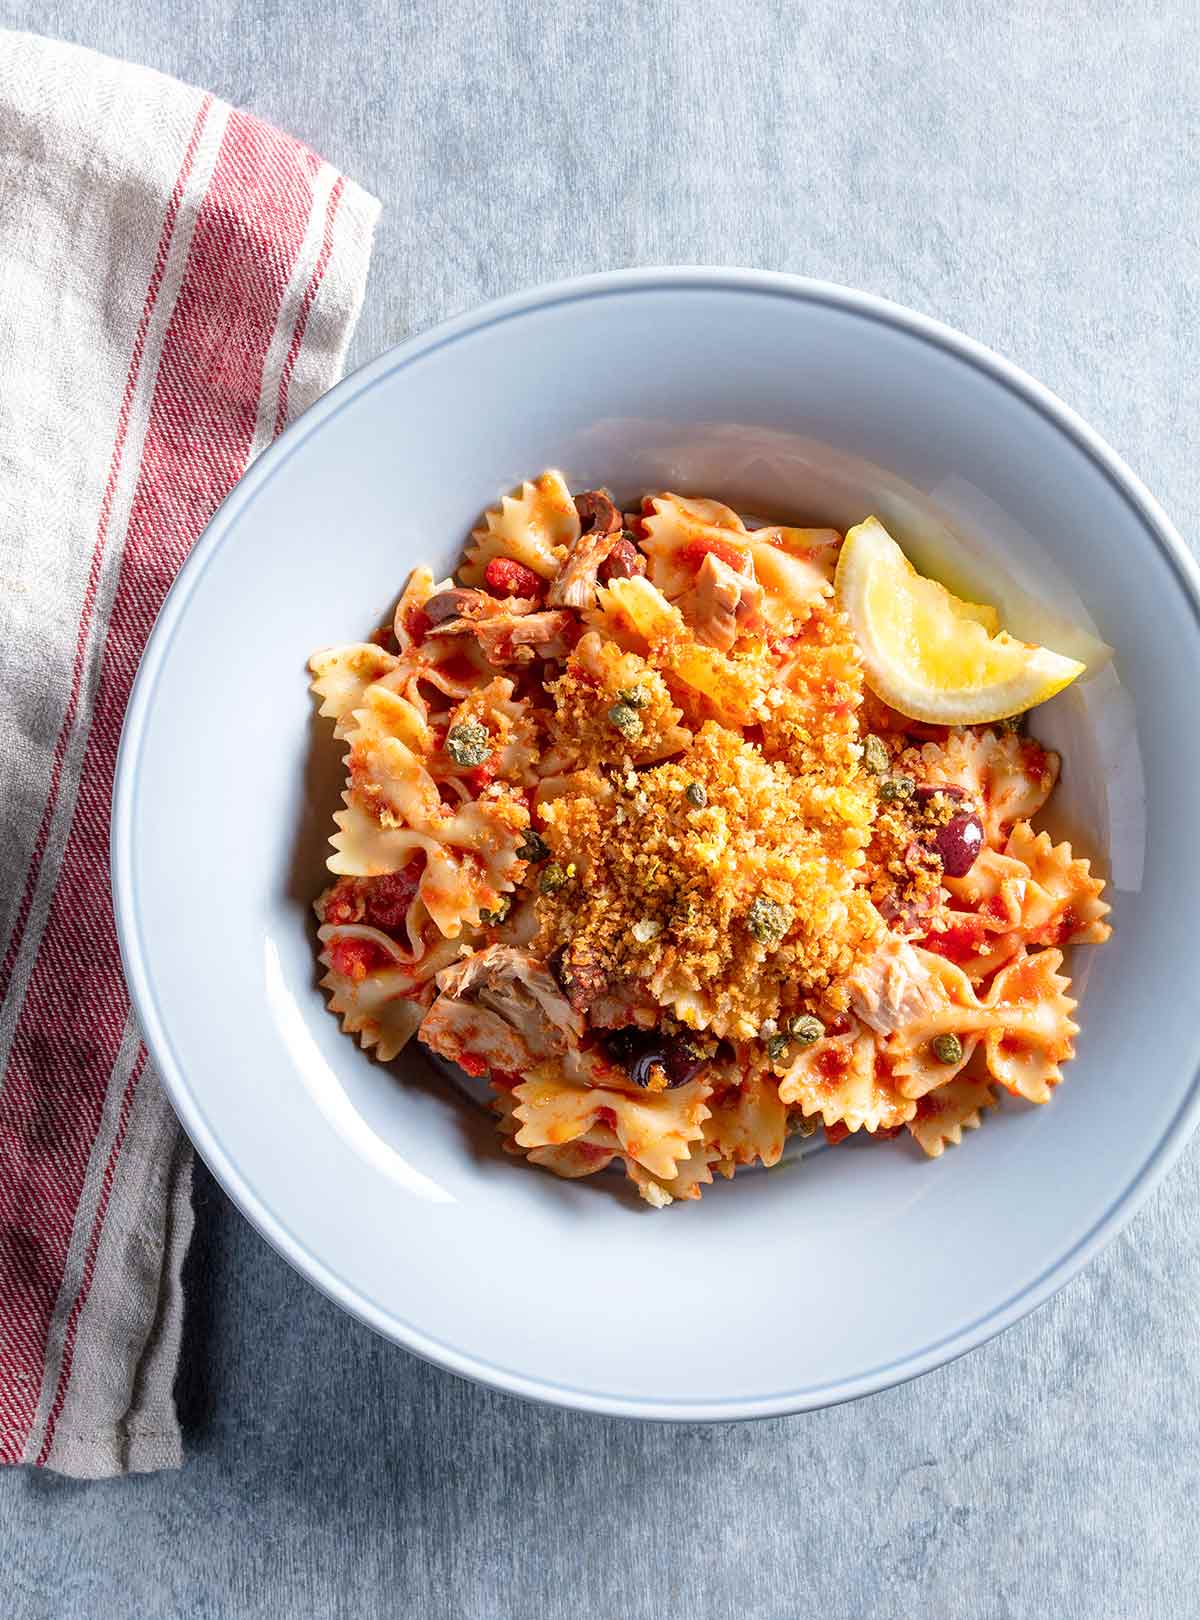 A pale blue bowl filled with farfalle, tuna, capers, tomatoes, and topped with bread crumbs and a slice of lemon, sitting on a red and white dish cloth.